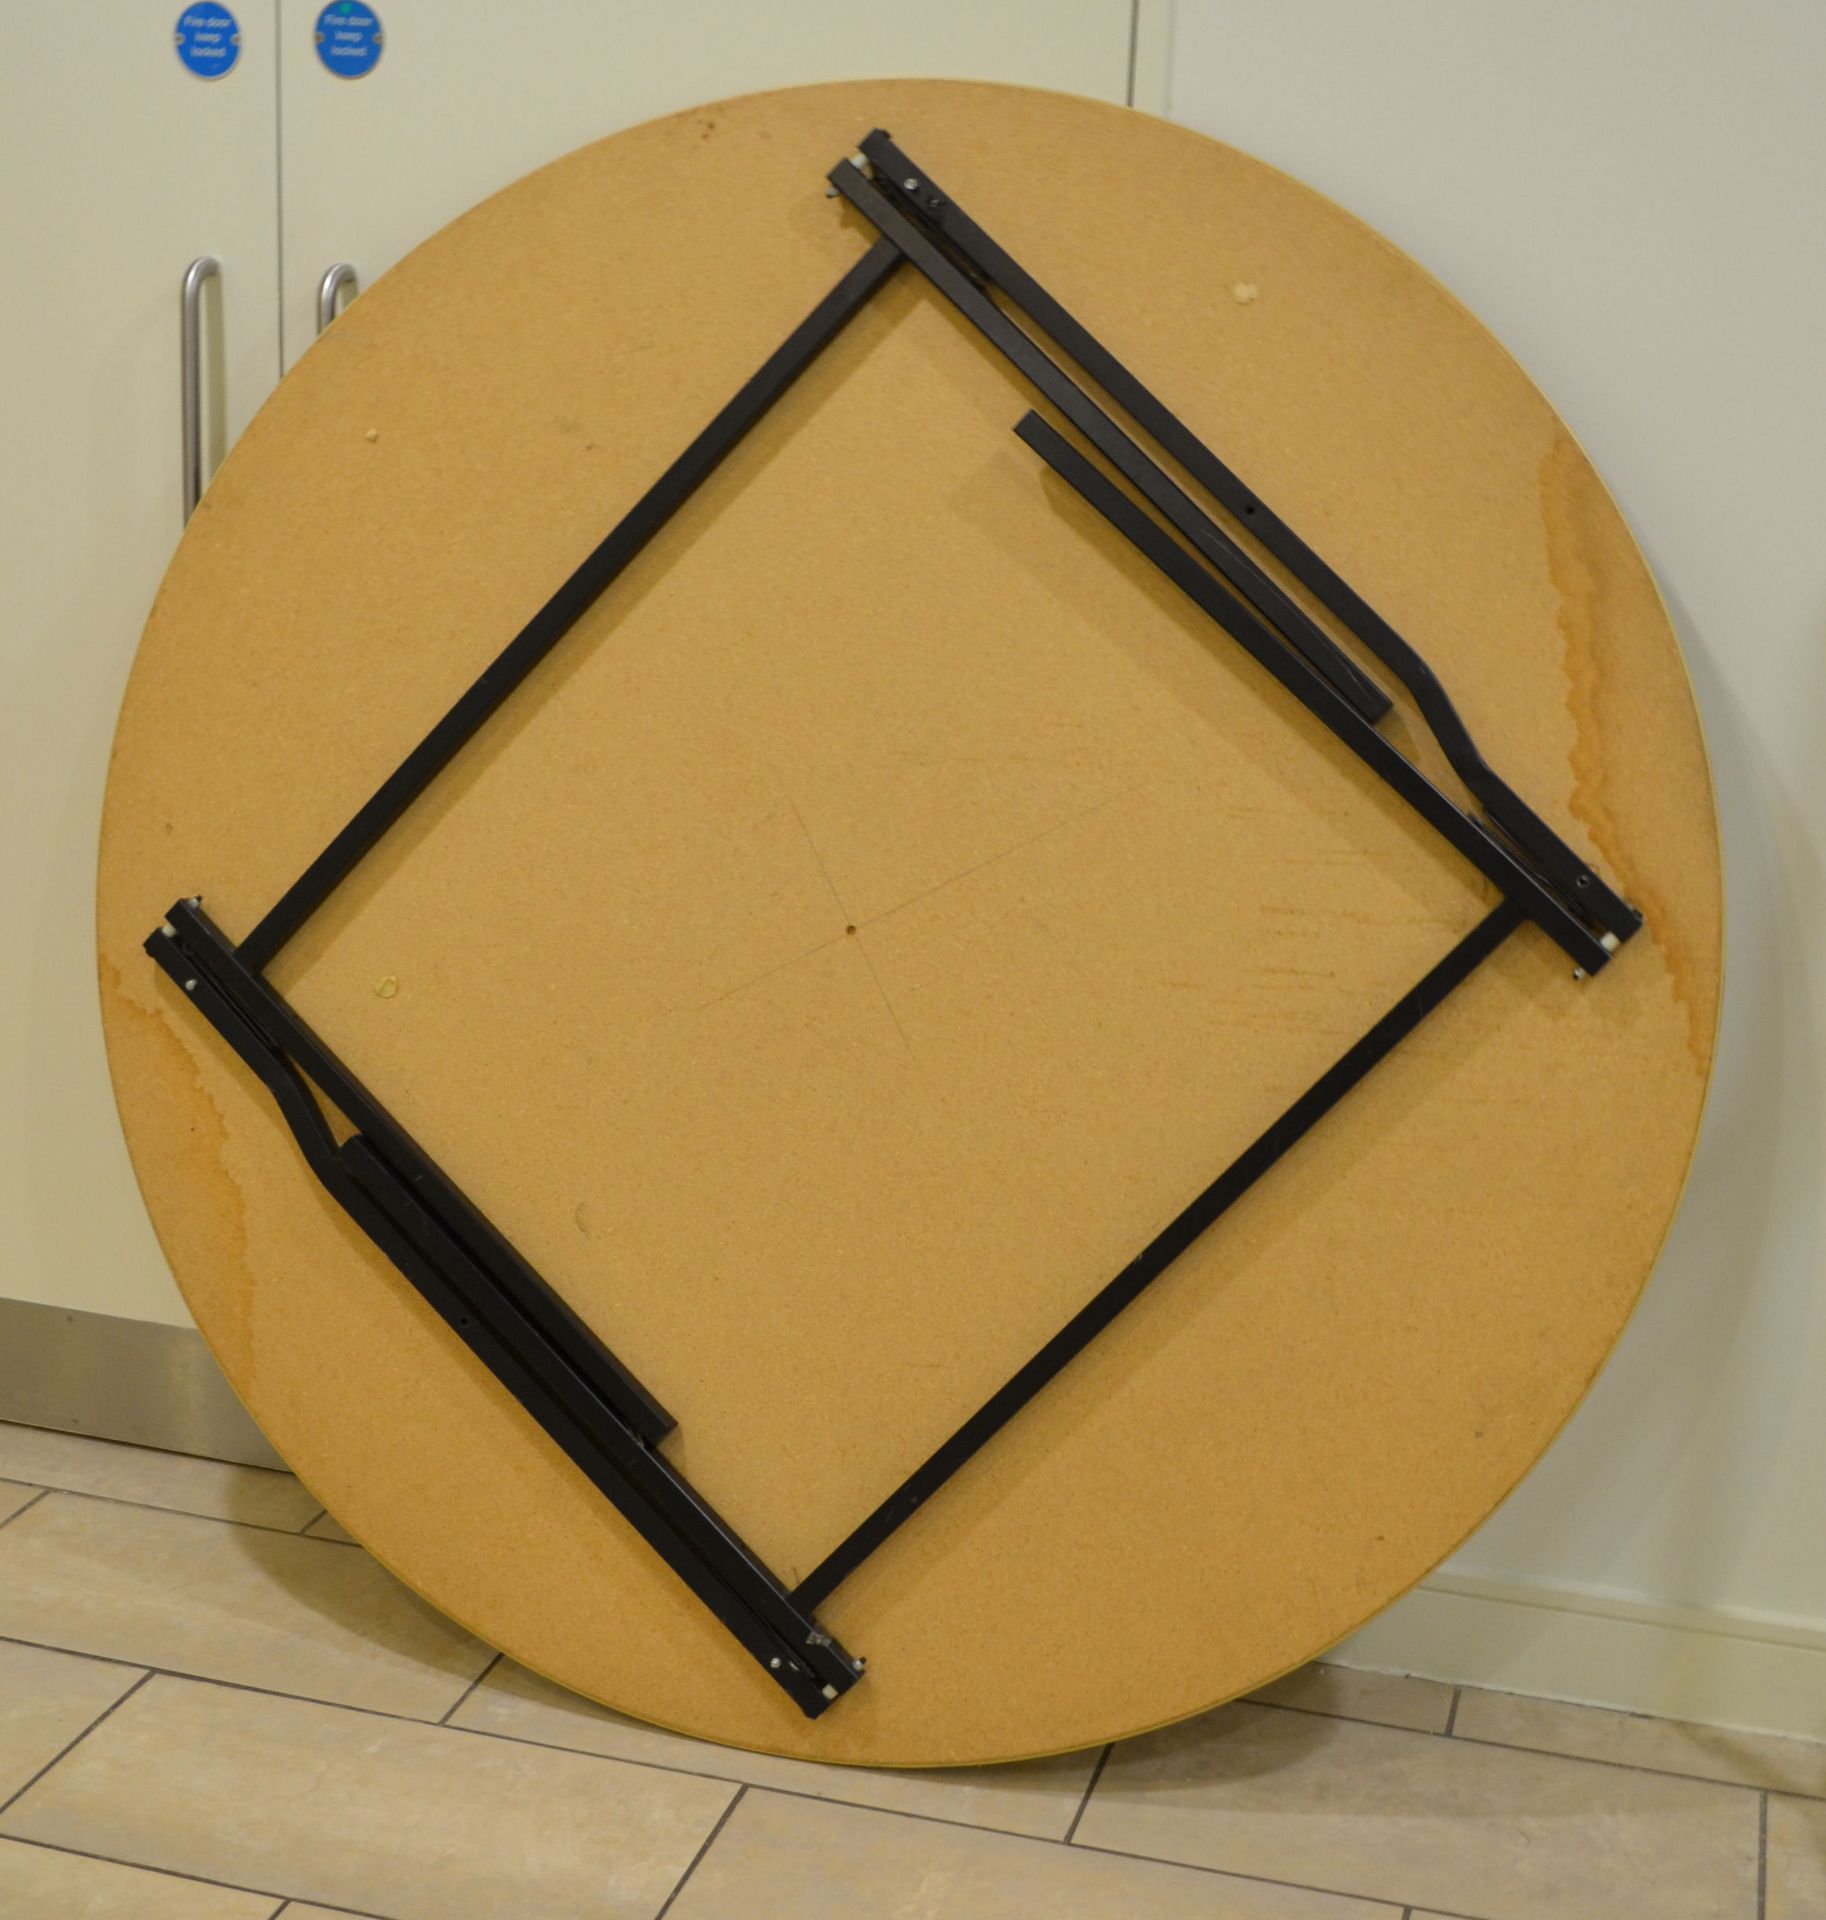 4 x 5 Foot Folding Round Banqueting Tables - CL152 - Location: Altrincham WA14 With a rubber-edged - Image 12 of 12